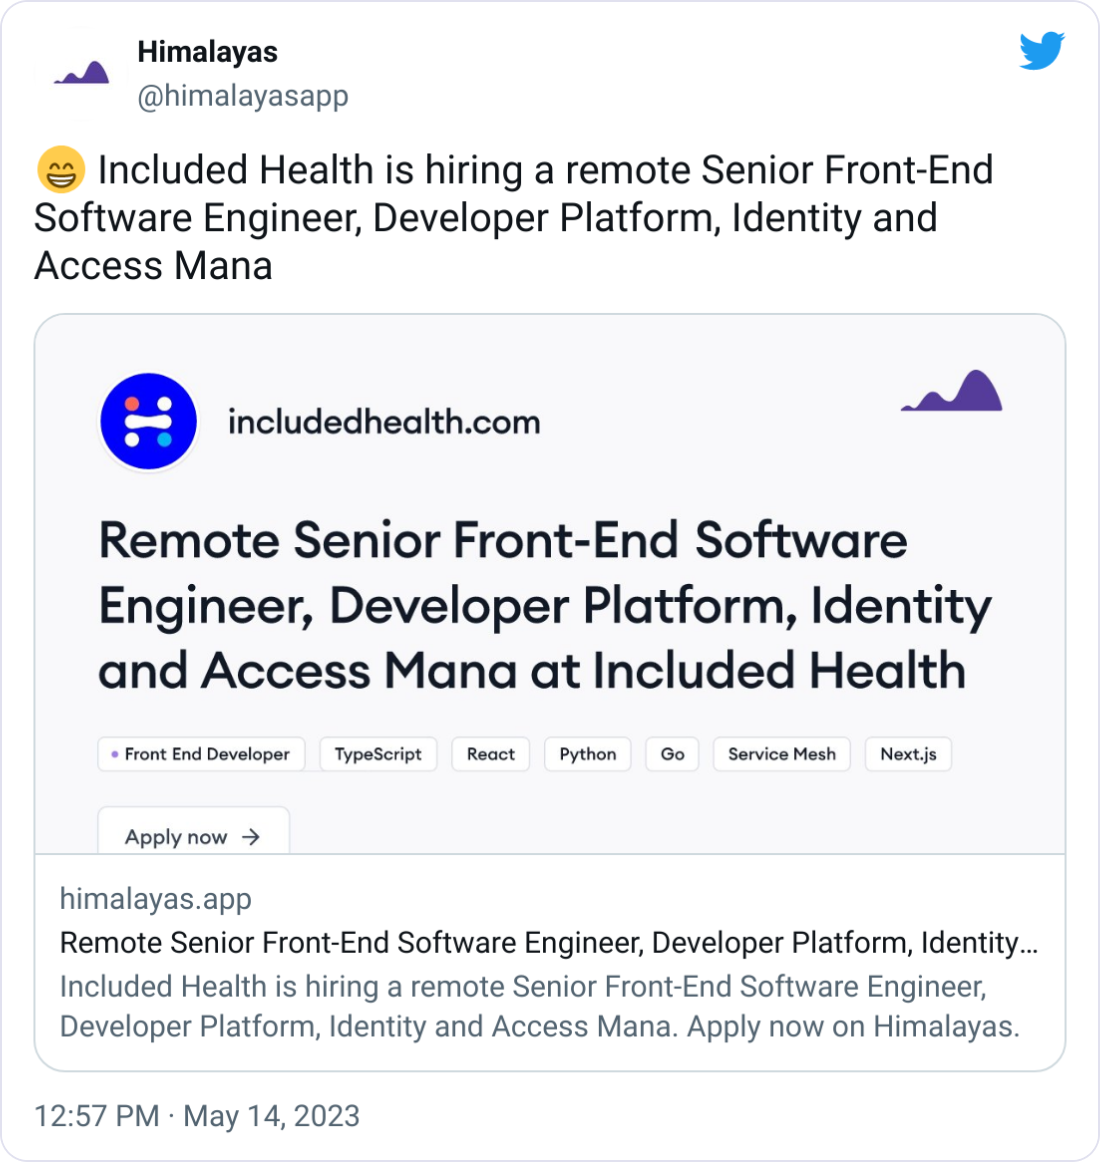 Himalayas @himalayasapp 😁 Included Health is hiring a remote Senior Front-End Software Engineer, Developer Platform, Identity and Access Mana